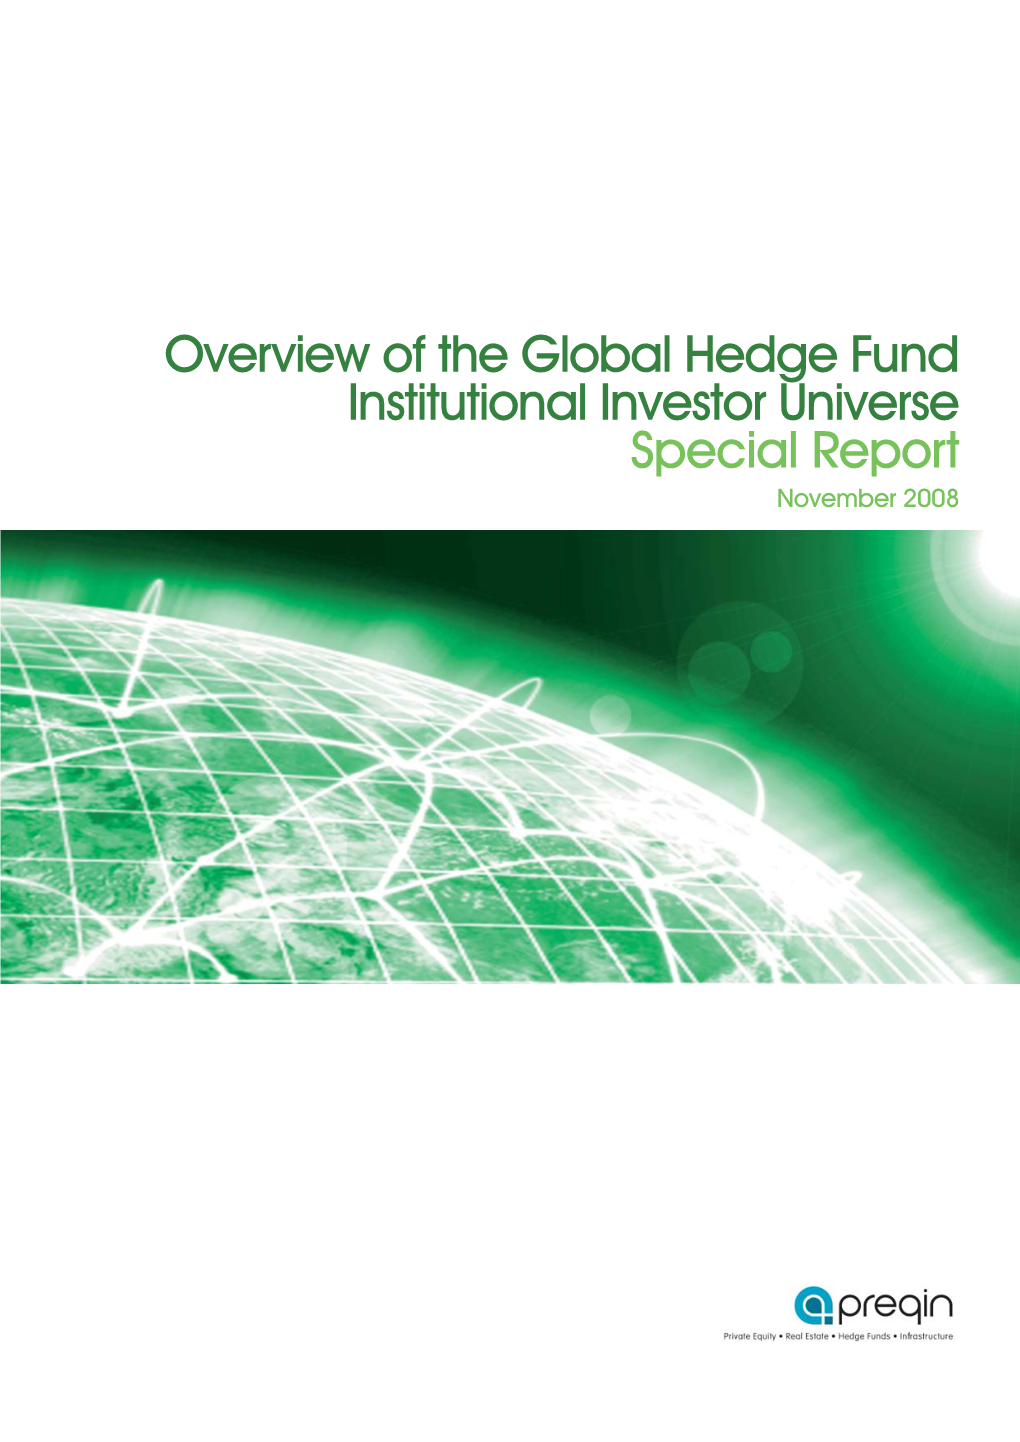 Overview of the Global Hedge Fund Institutional Investor Universe